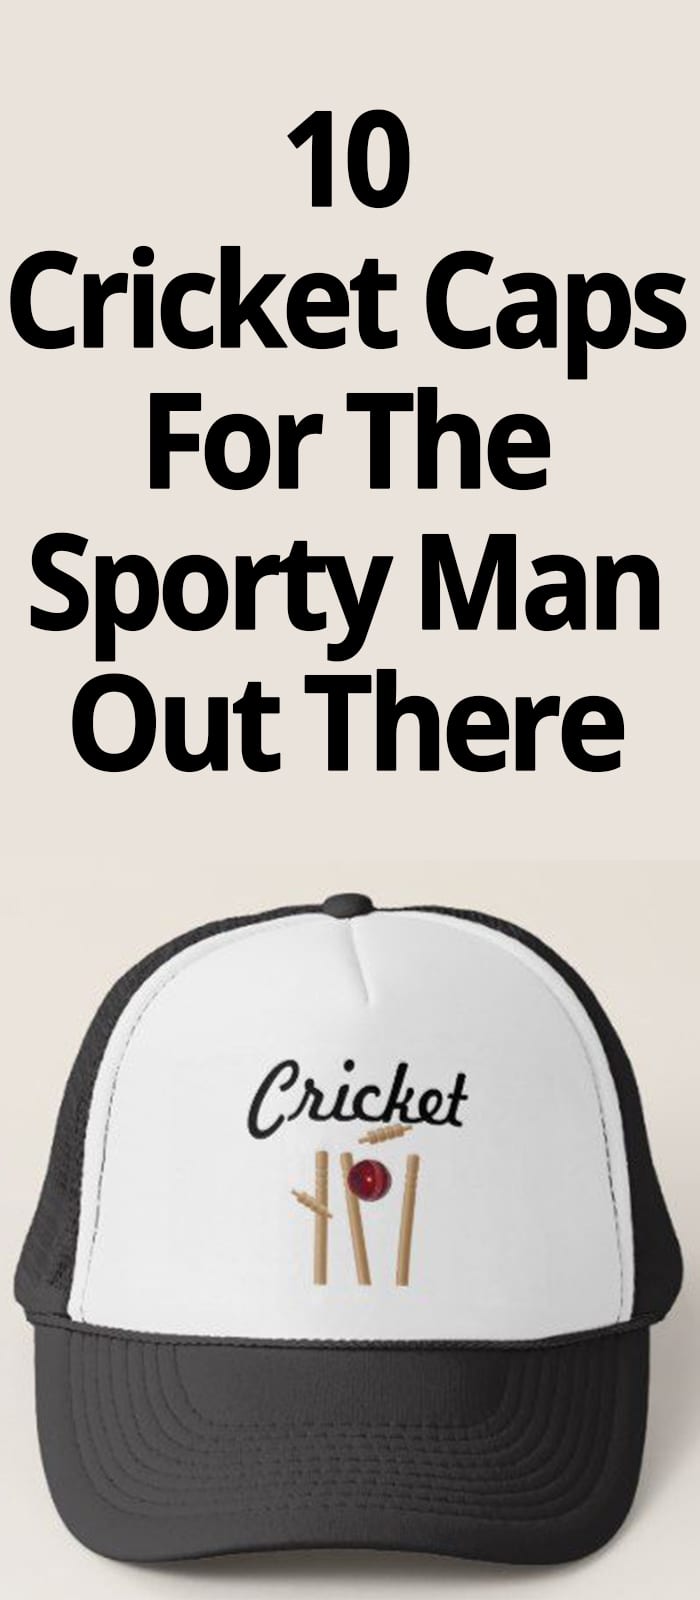 10 CRICKET CAPS FOR THE SPORTY MAN